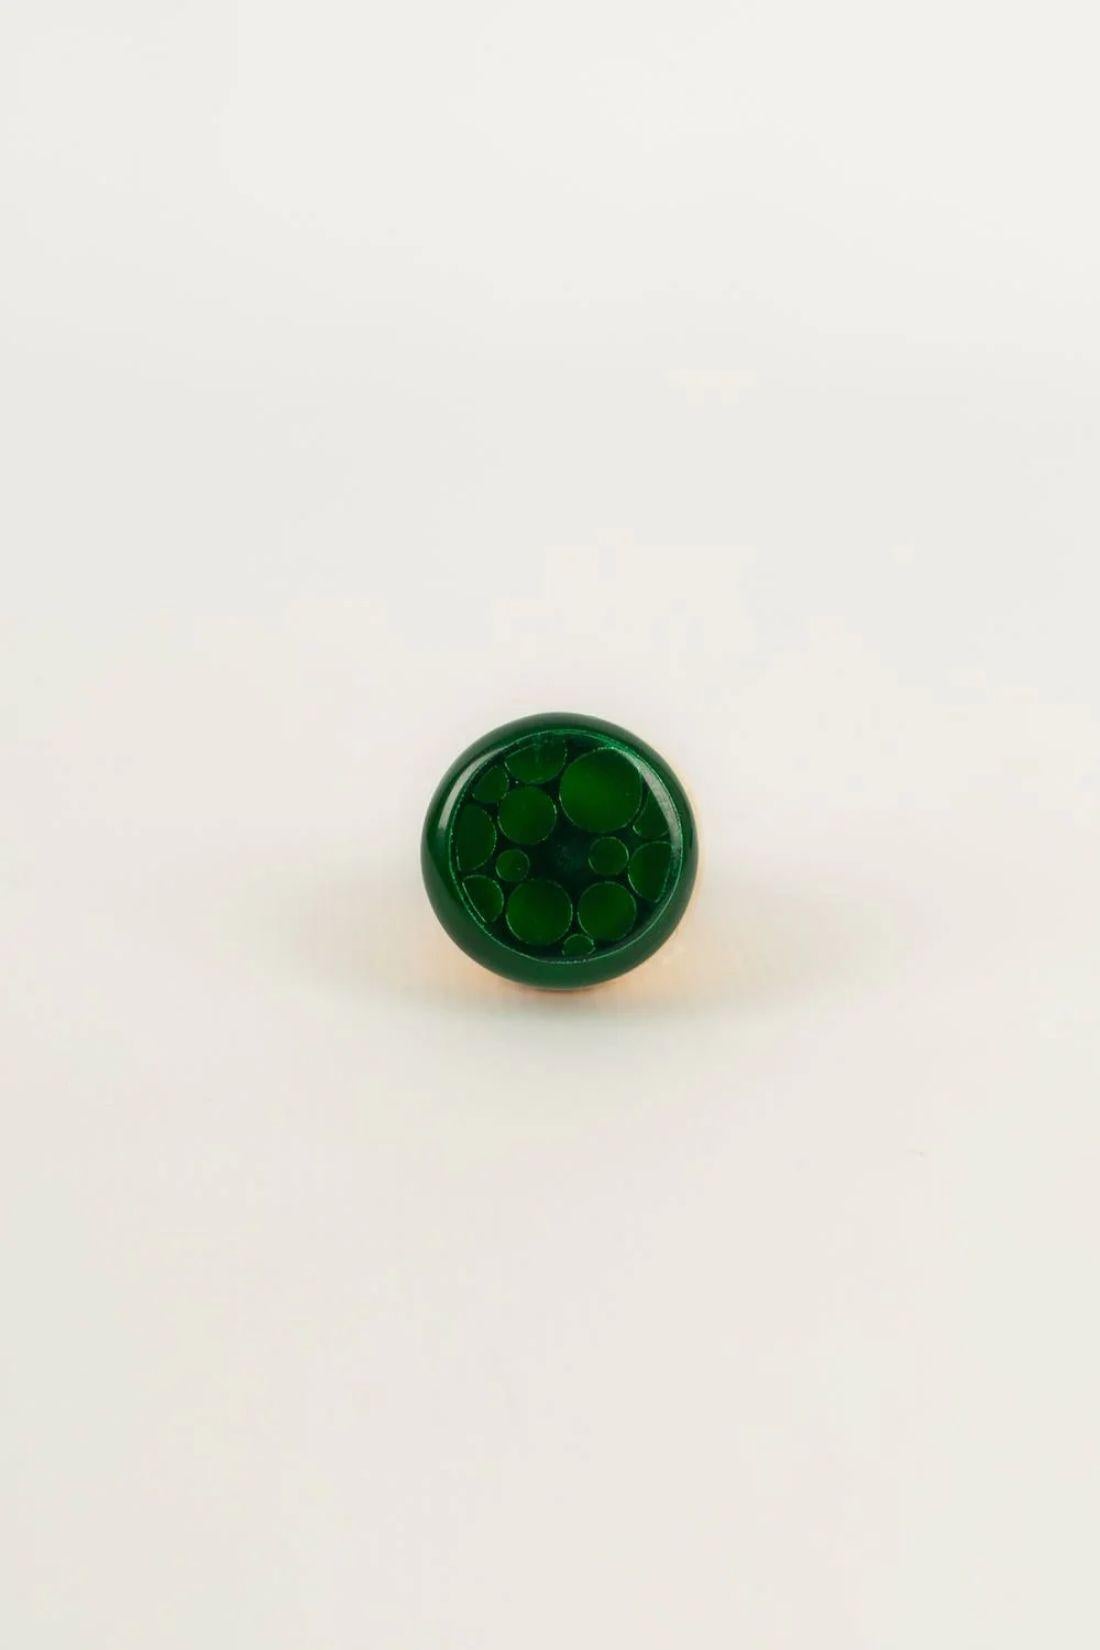 Paco Rabanne - Ring in gold metal and green resin.

Additional information:
Dimensions: Size 53
Condition: Good condition
Seller Ref number: BG17